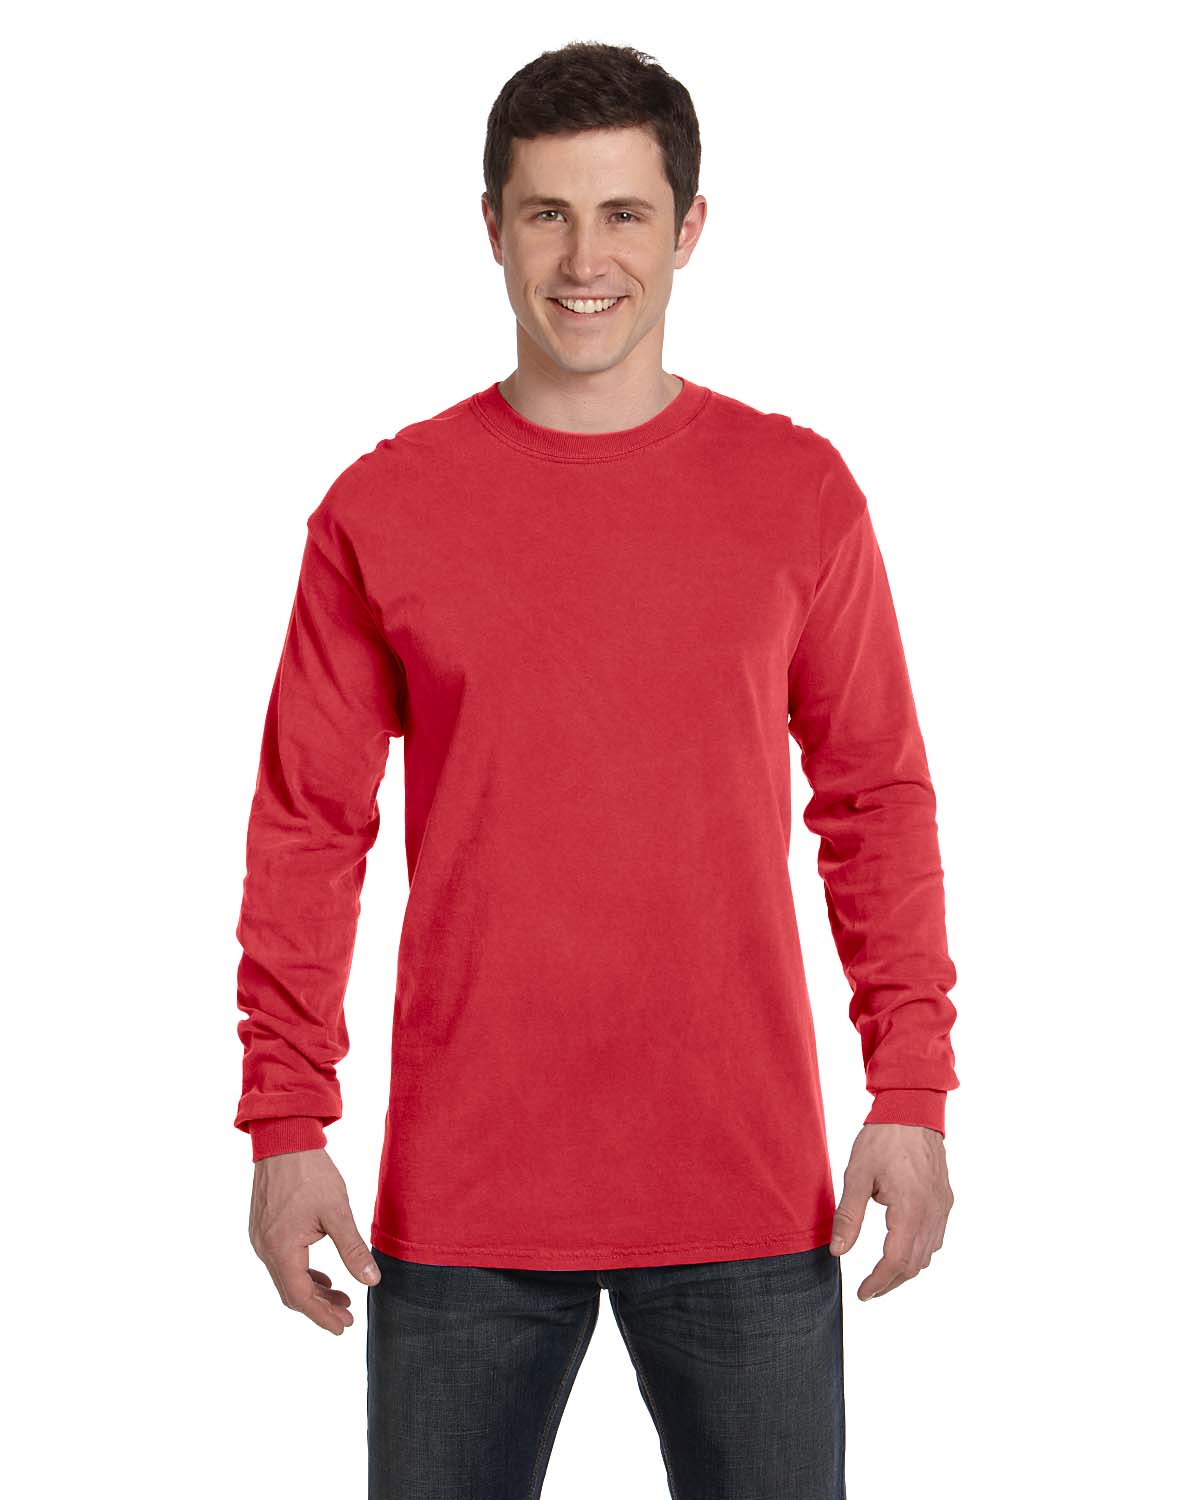 Comfort Colors C6014 Adult Heavyweight RS Long-Sleeve T-Shirt - Red - S